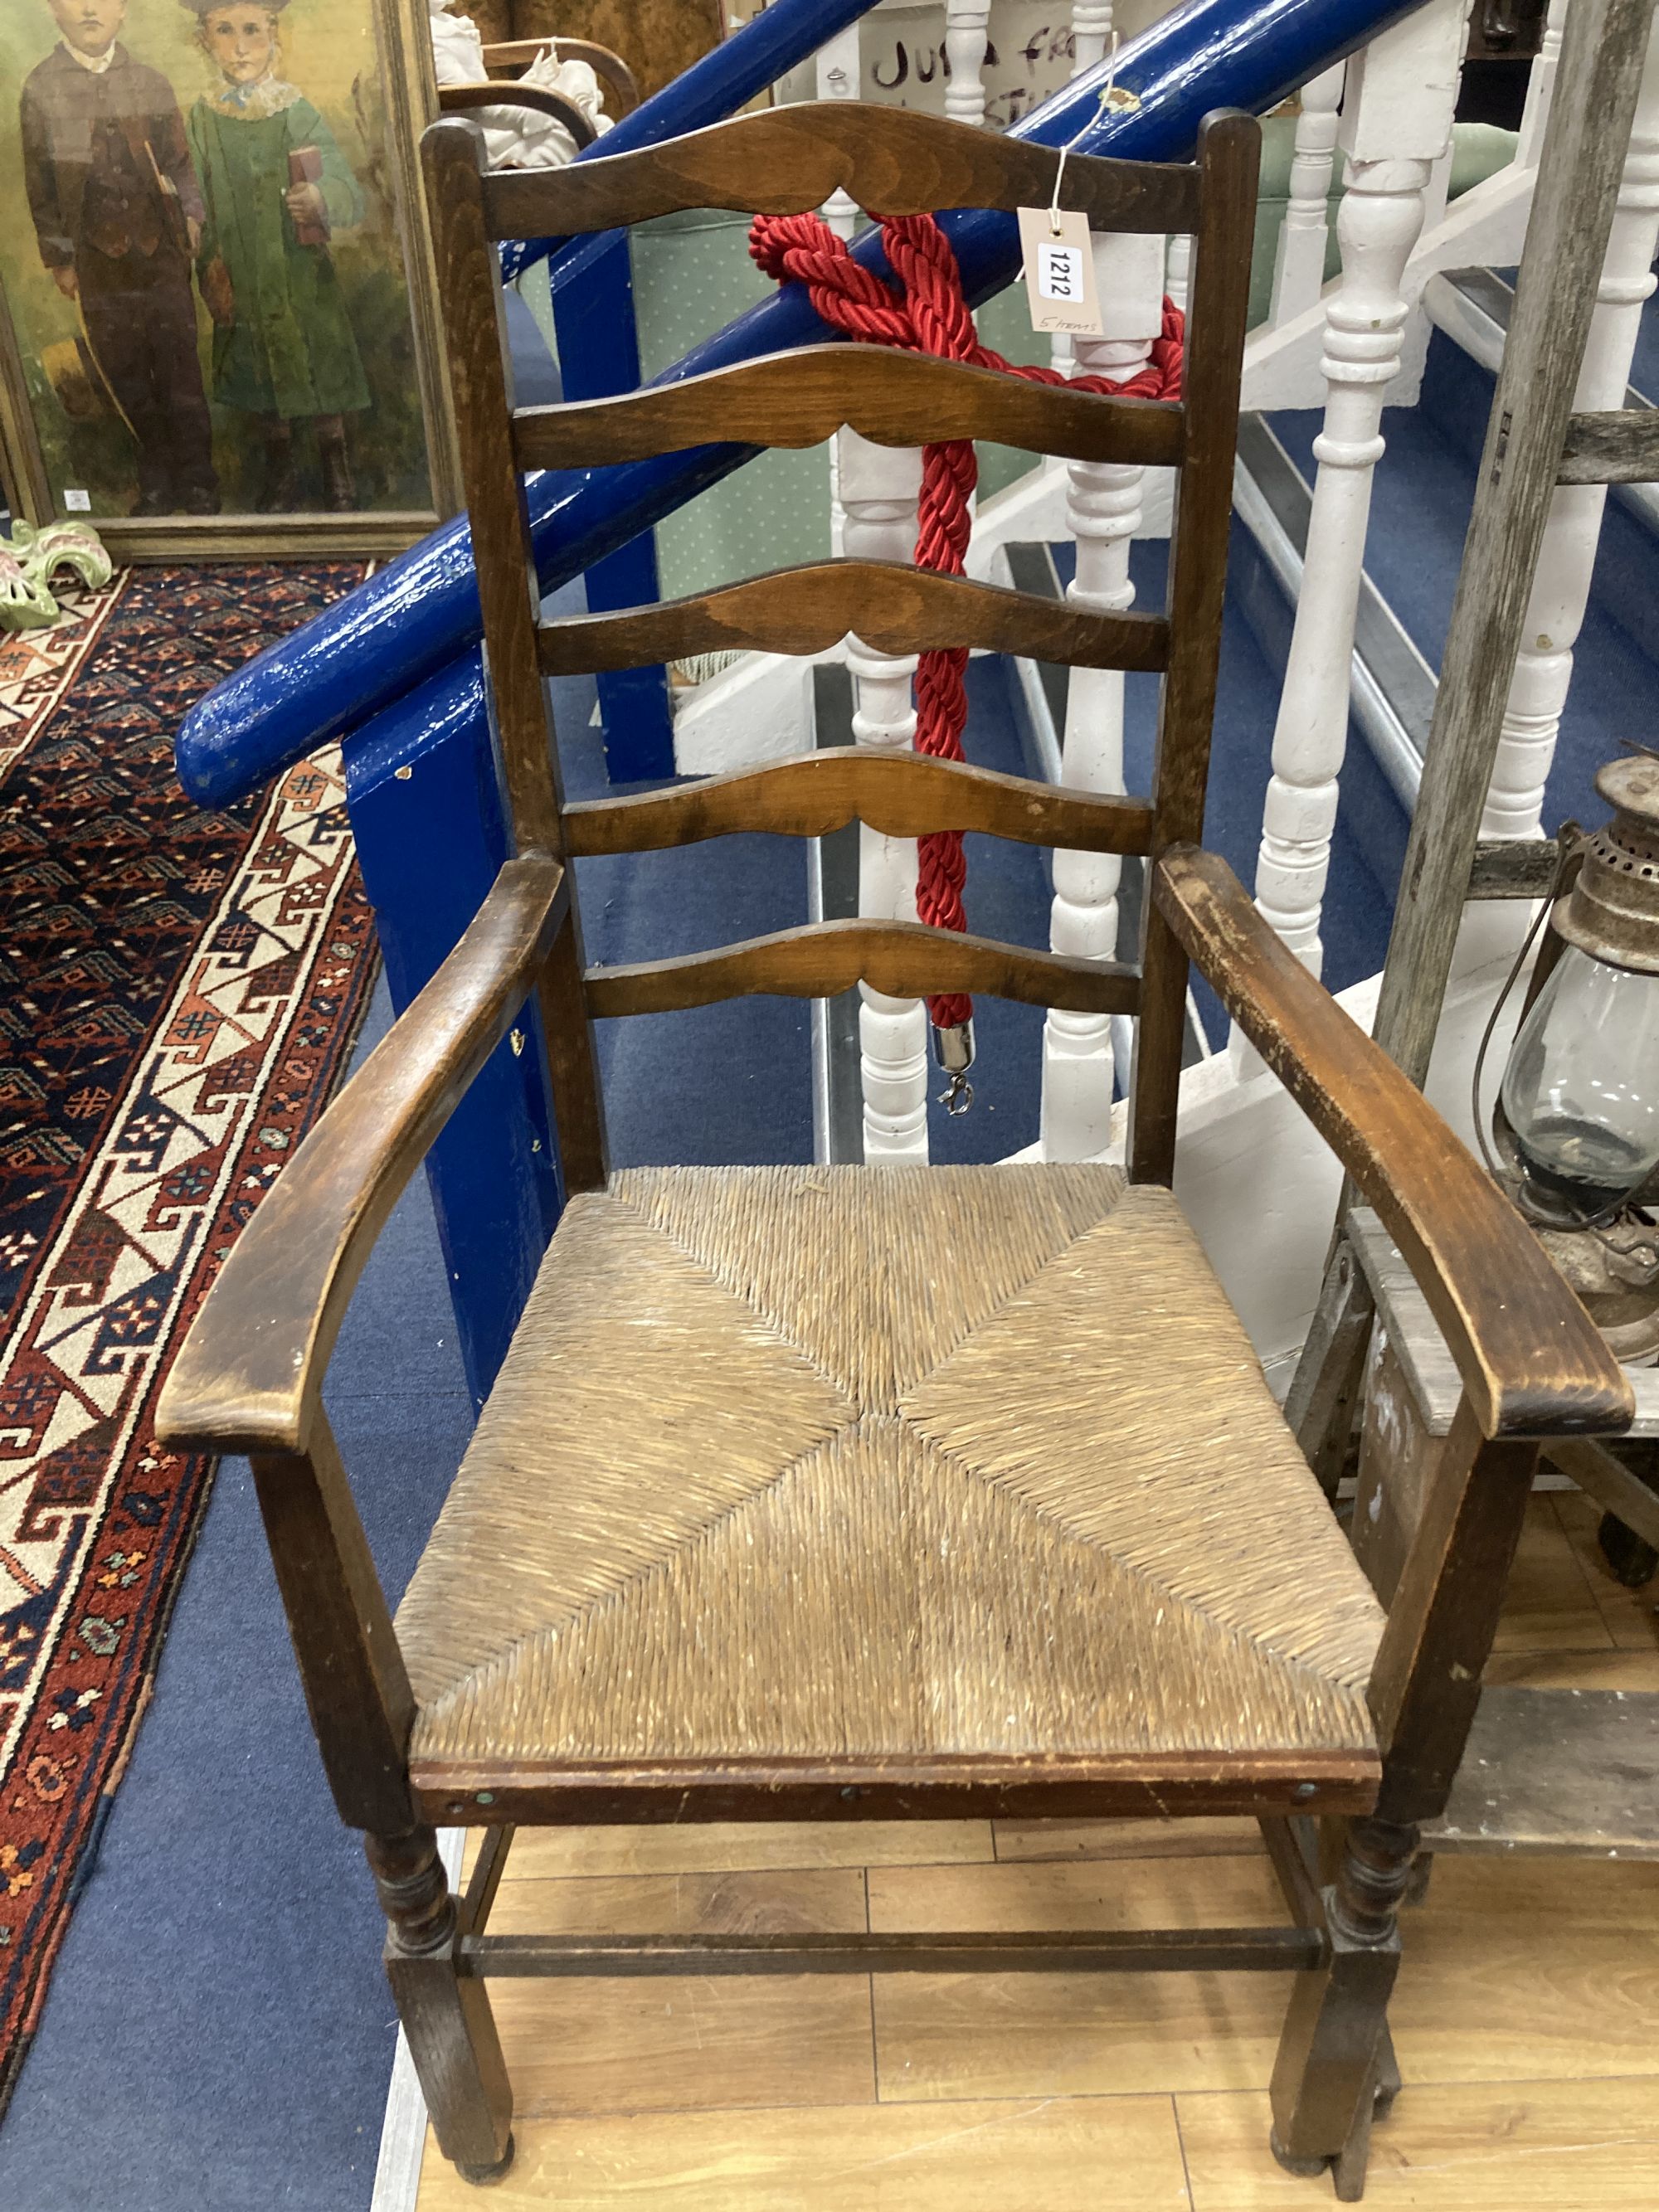 A rush seated beech elbow chair, a vintage five tread step ladder, a similar pine step stool and two oil lamps